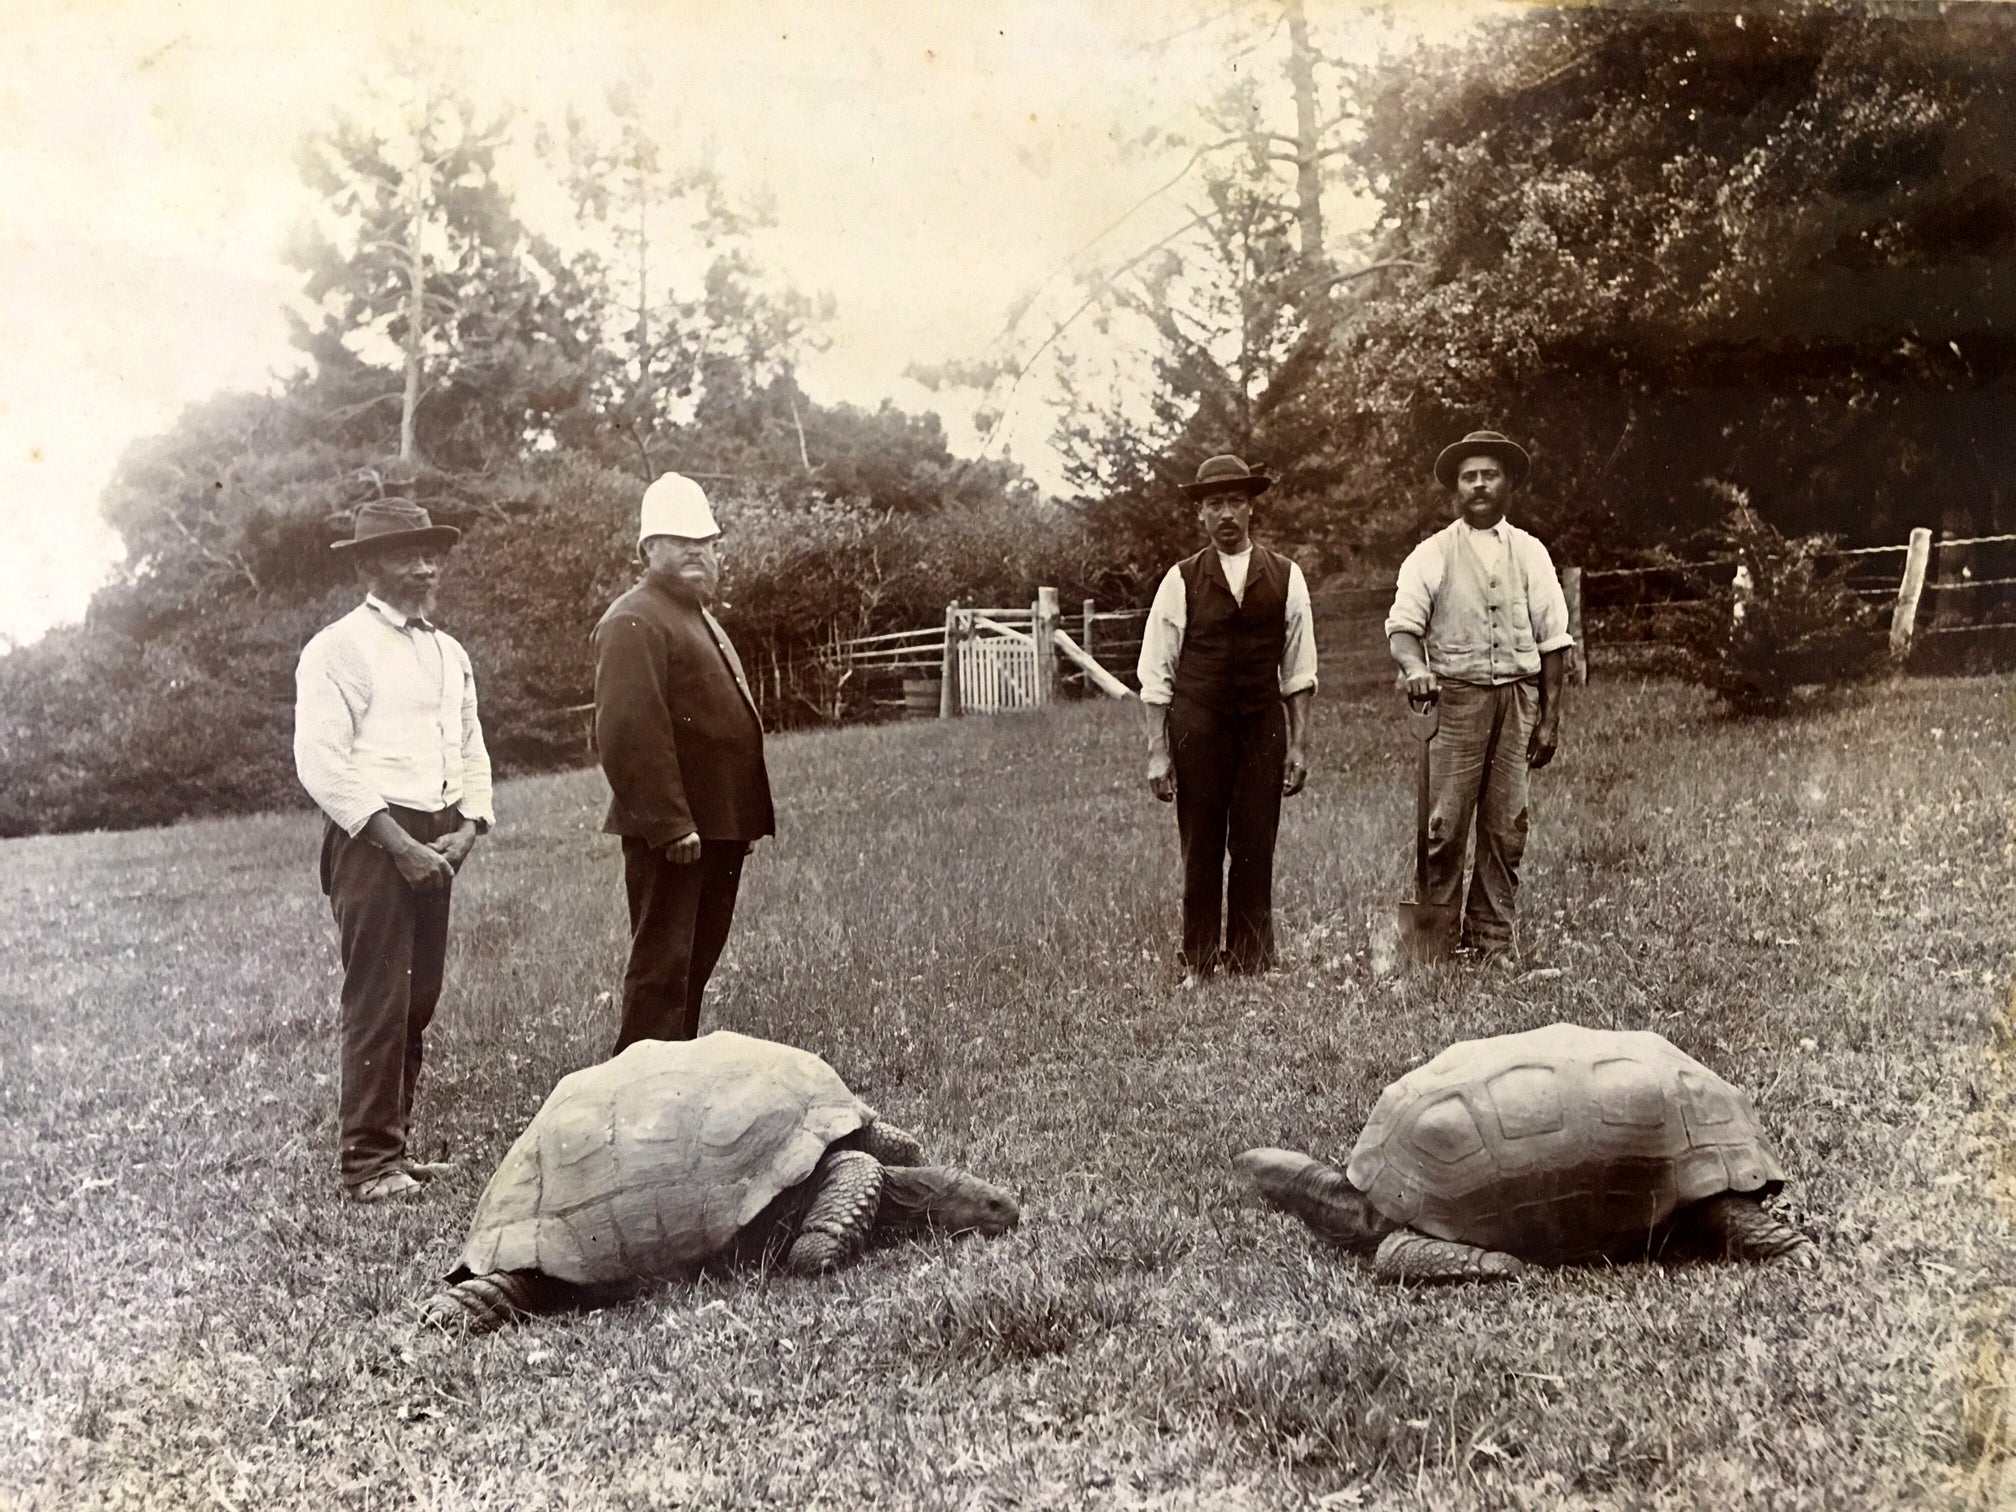 This historical photo taken in the late 1800s shows Jonathan, left, with another tortoise, now dead